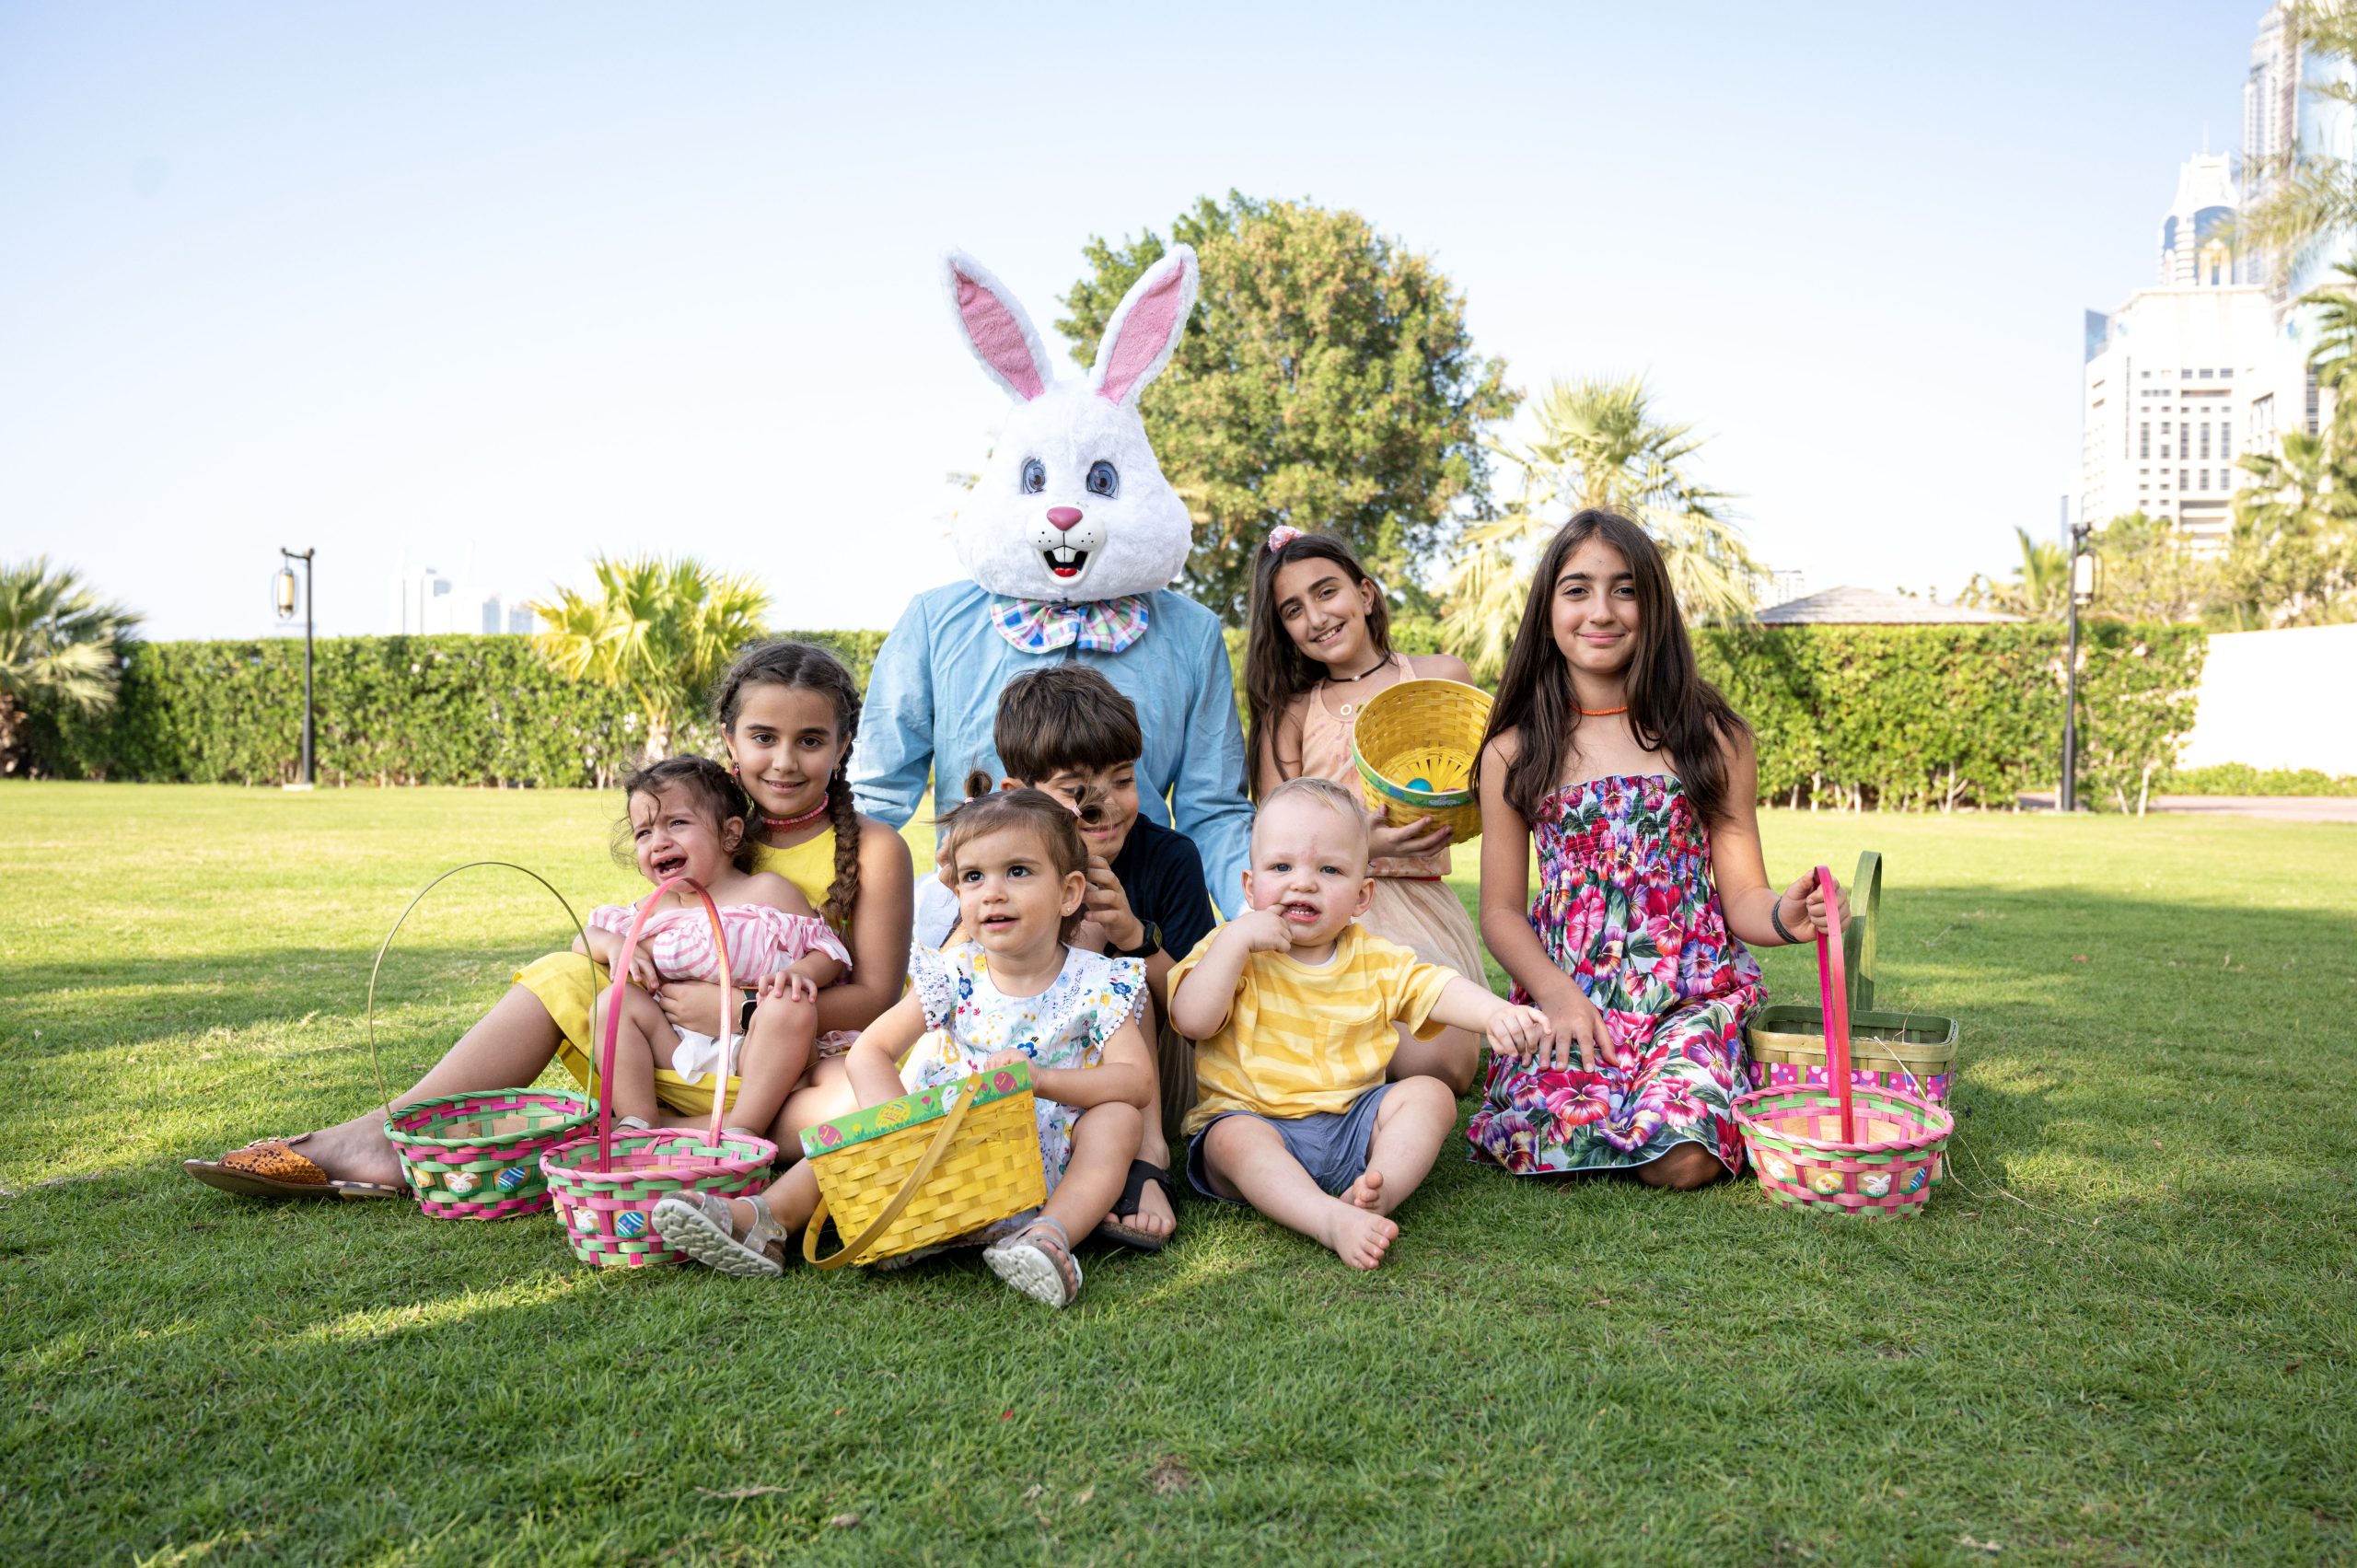 Celebrate the Easter spirit with a Marvellous Outdoor Easter Sunday